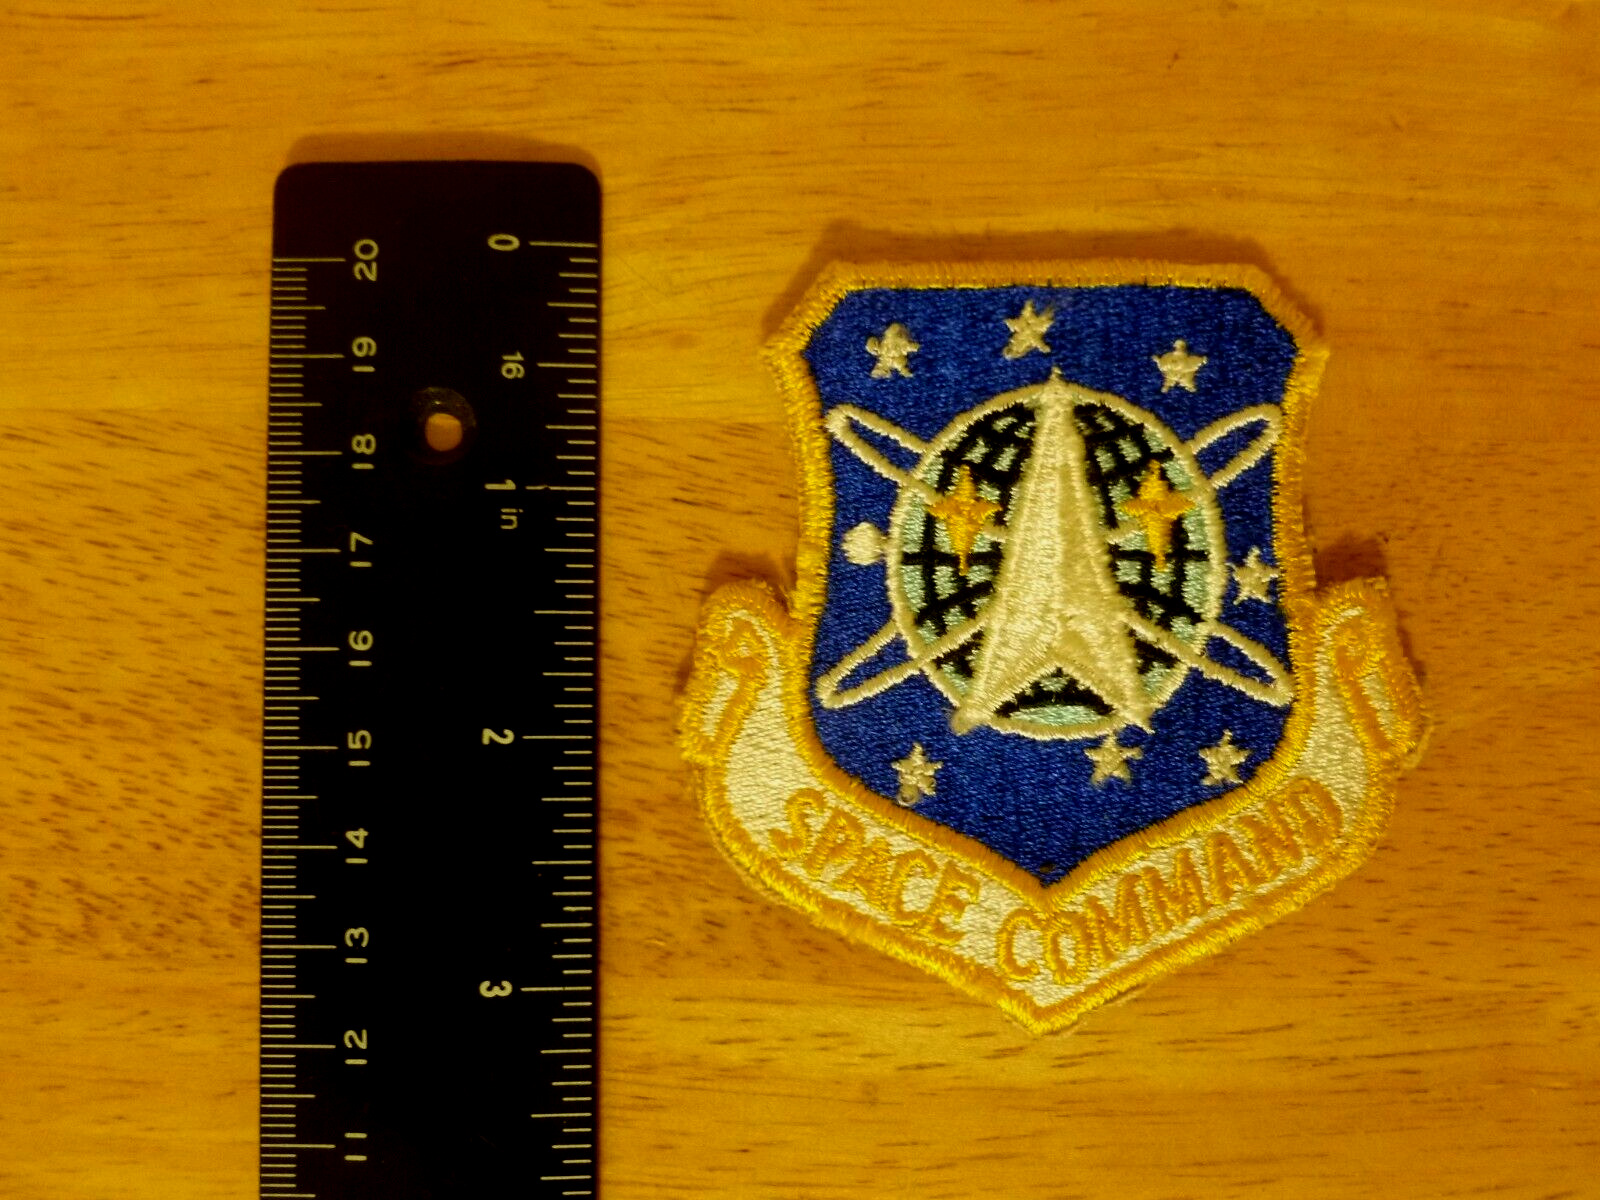 USAF US Air Force Space Command Patch